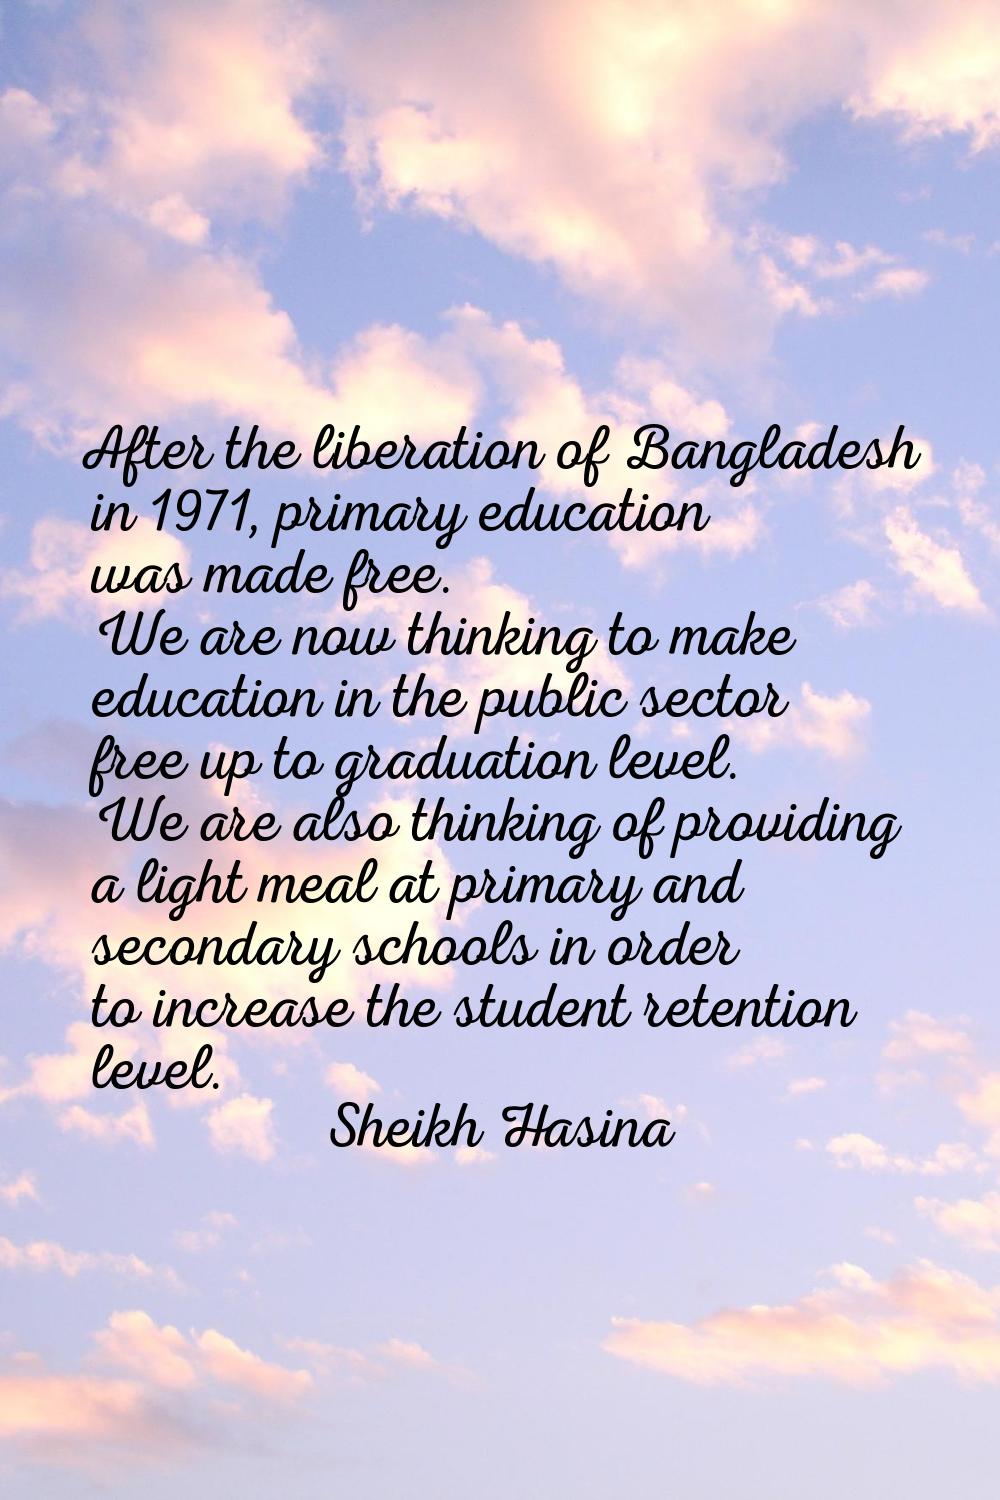 After the liberation of Bangladesh in 1971, primary education was made free. We are now thinking to